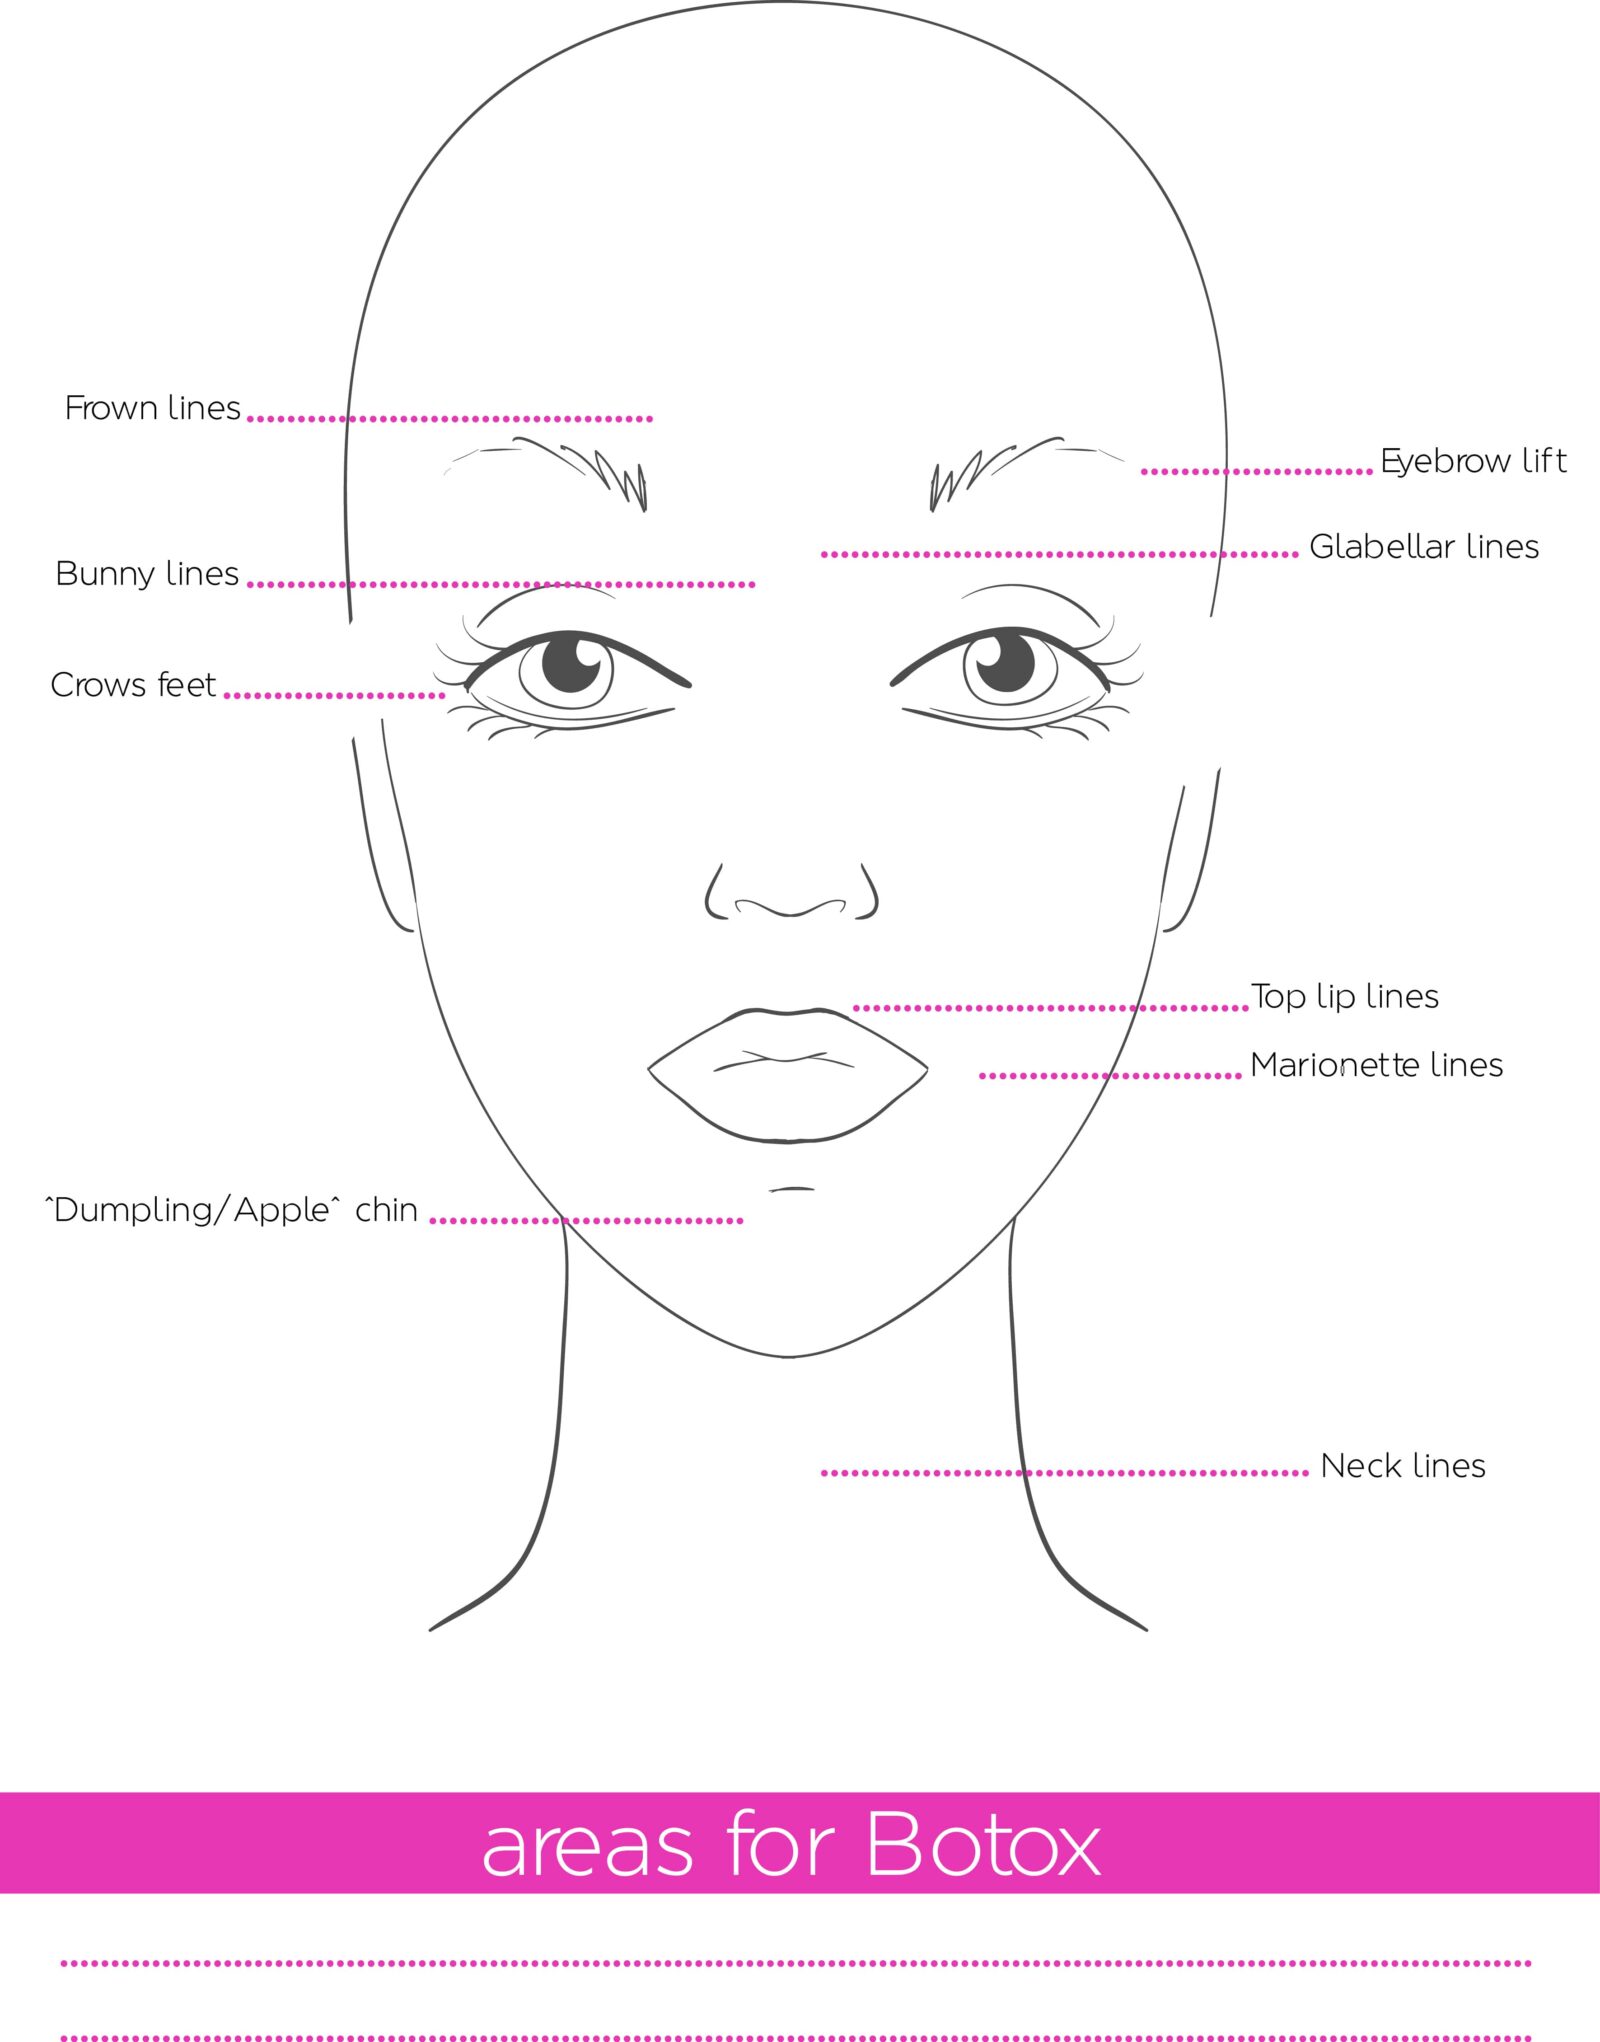 areas for botox injections